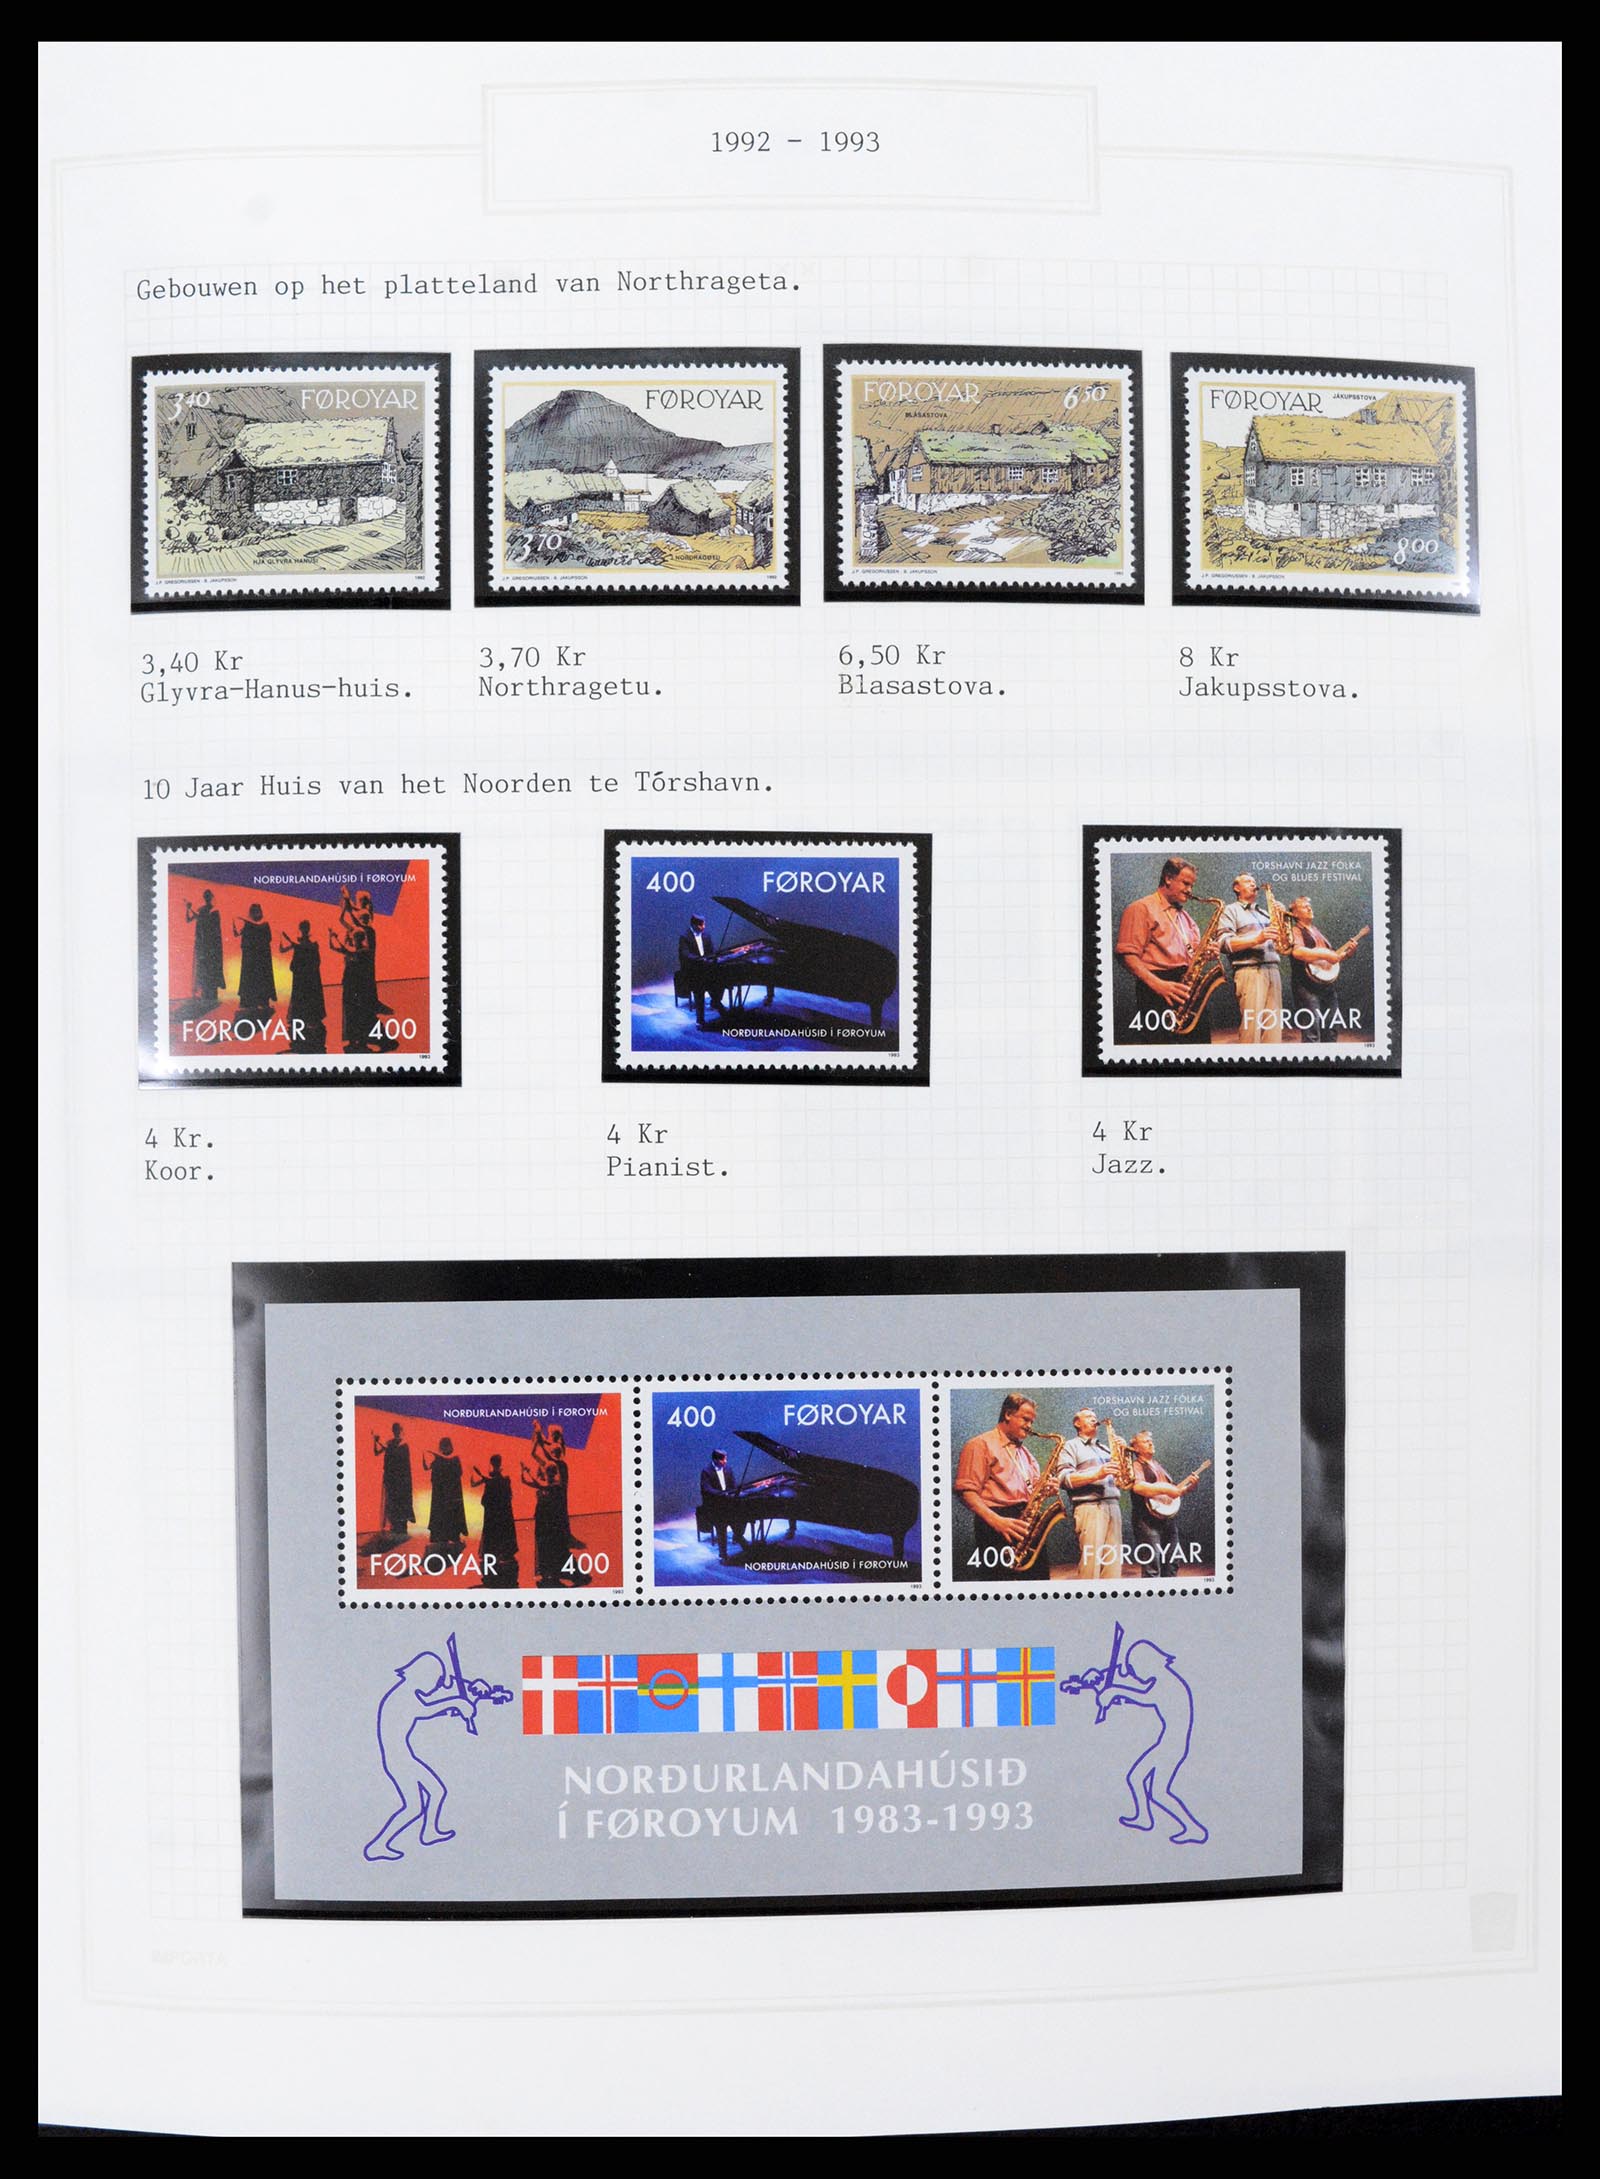 37302 030 - Stamp collection 37302 Greenland and Faroe Islands 1905-2001.